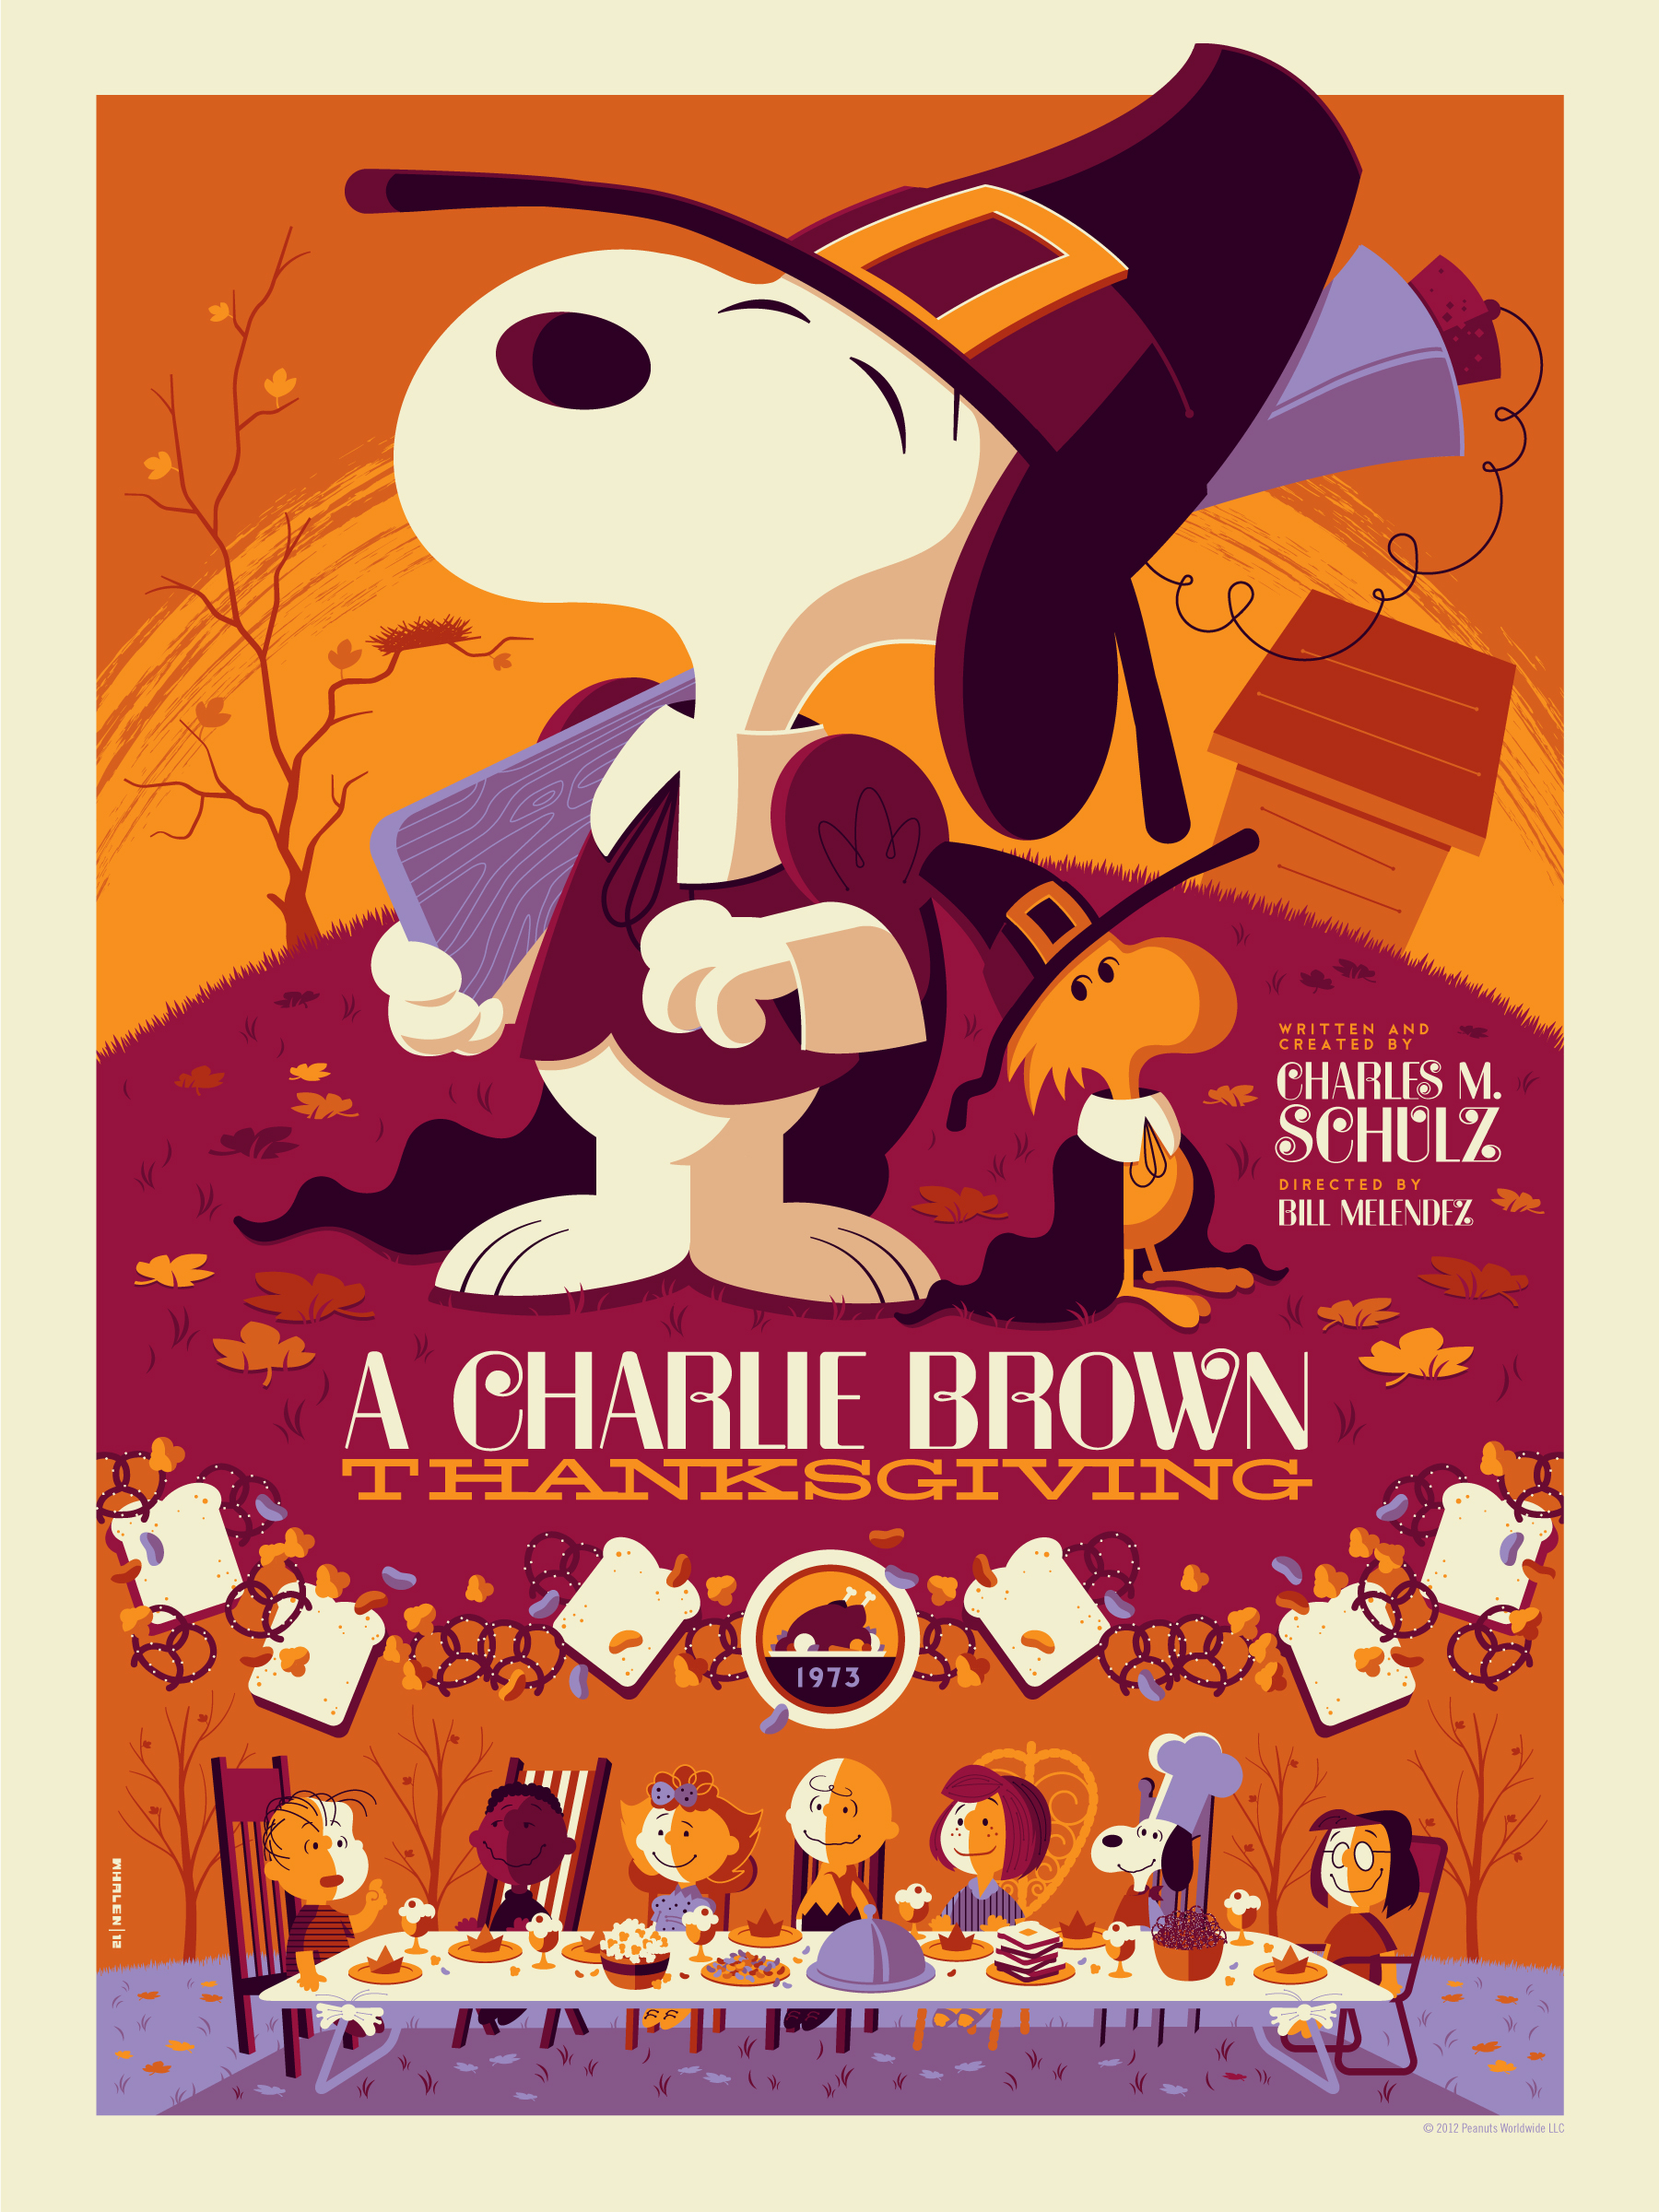 A Charlie Brown Thanksgiving”